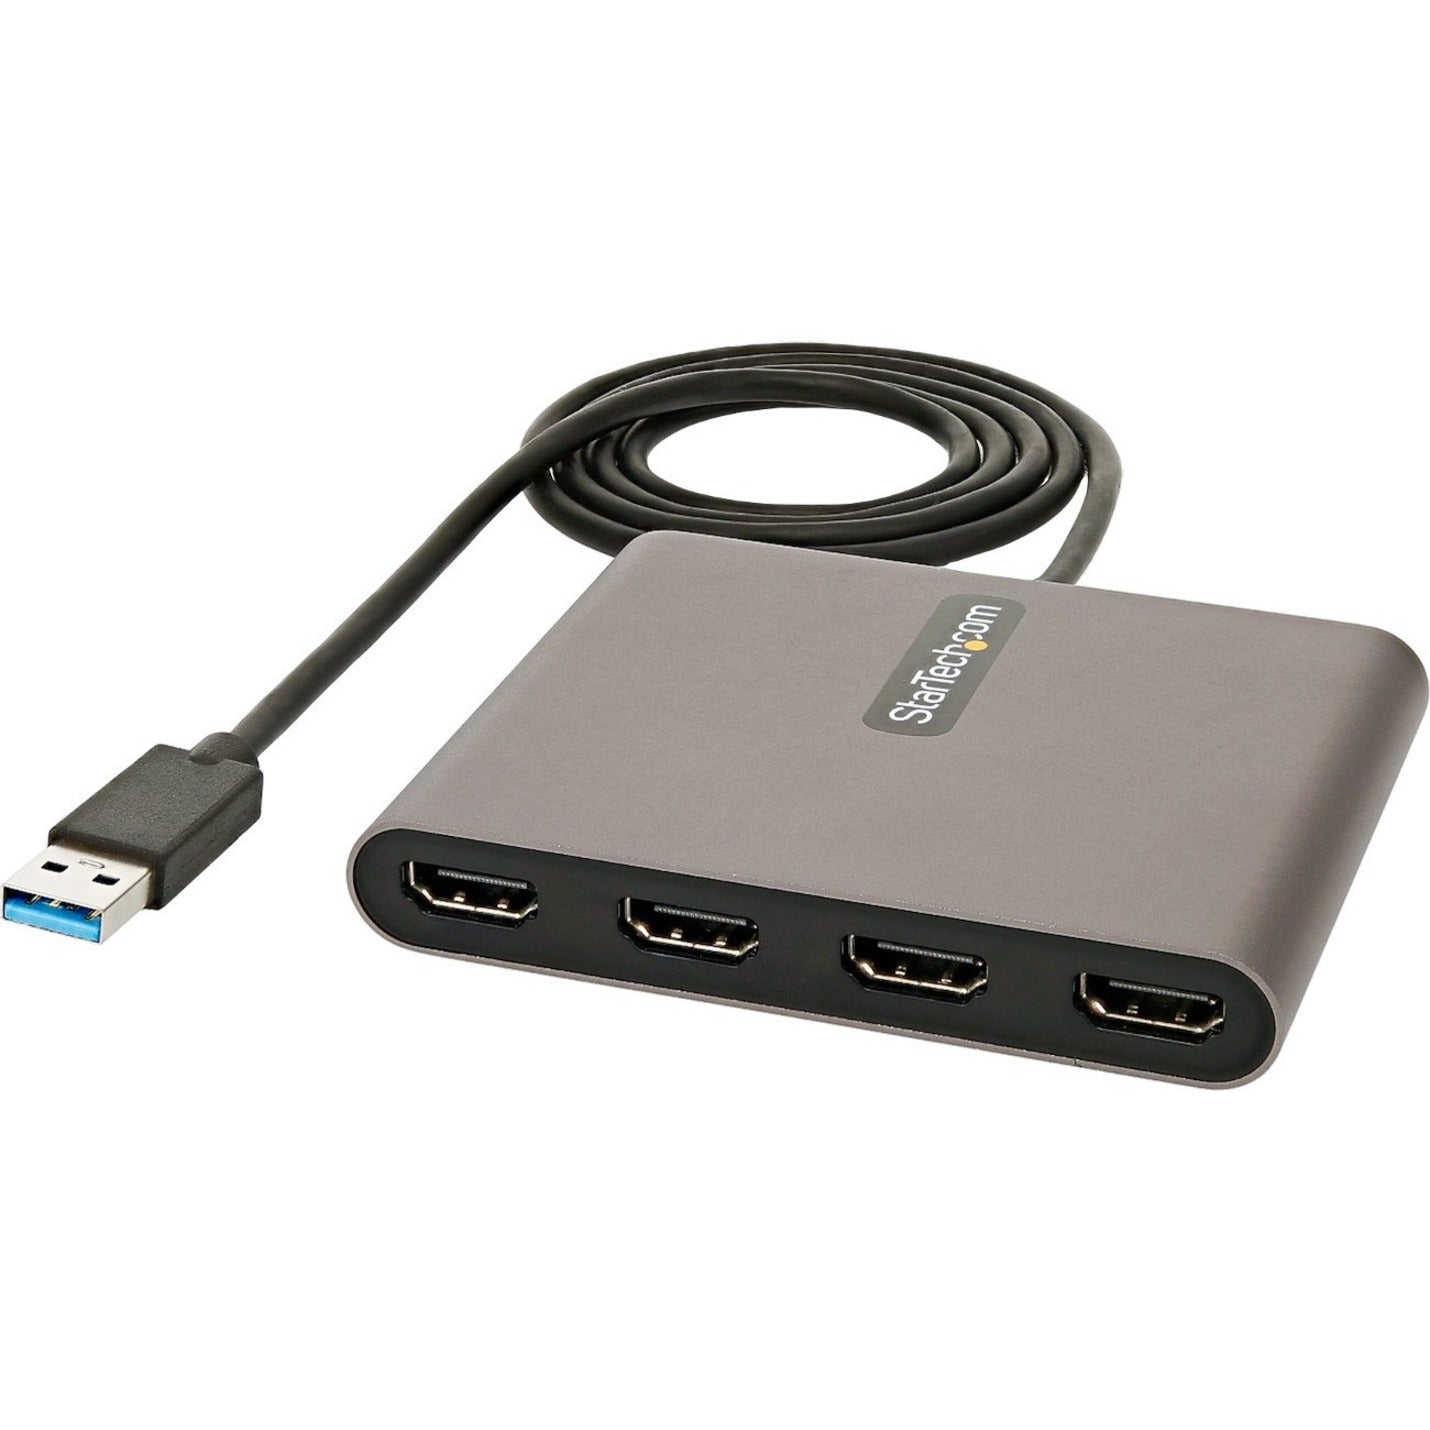 StarTech.com USB32HD4 USB-A to HDMI Adapter, 1920 x 1080, Space Gray, 2 Year Warranty